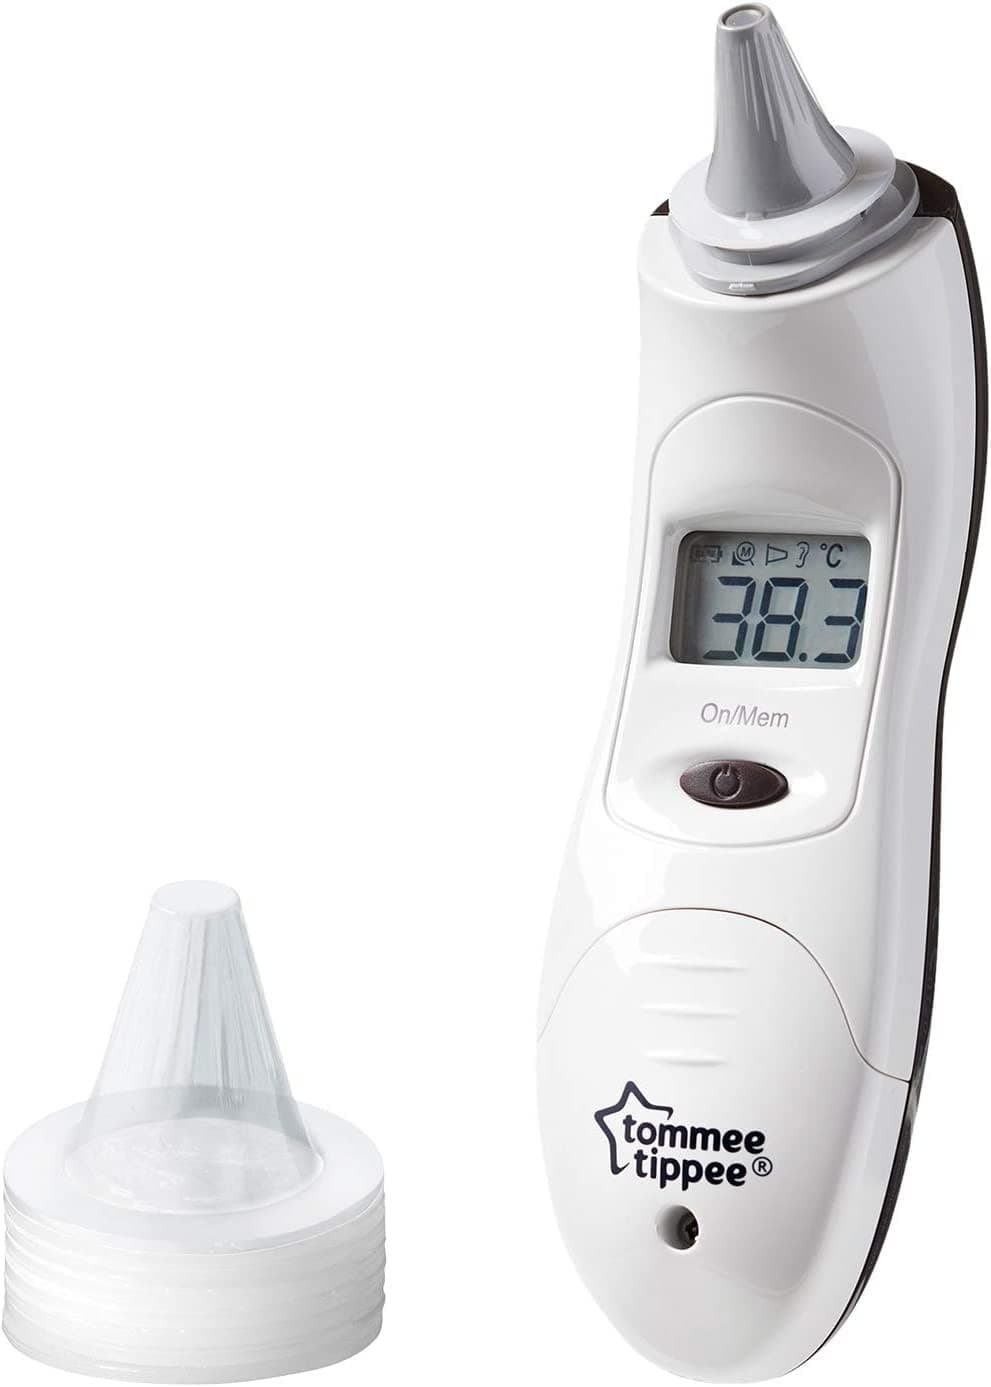 Tommee Tippee Digital Ear Thermometer Hygiene Covers (40 refills).